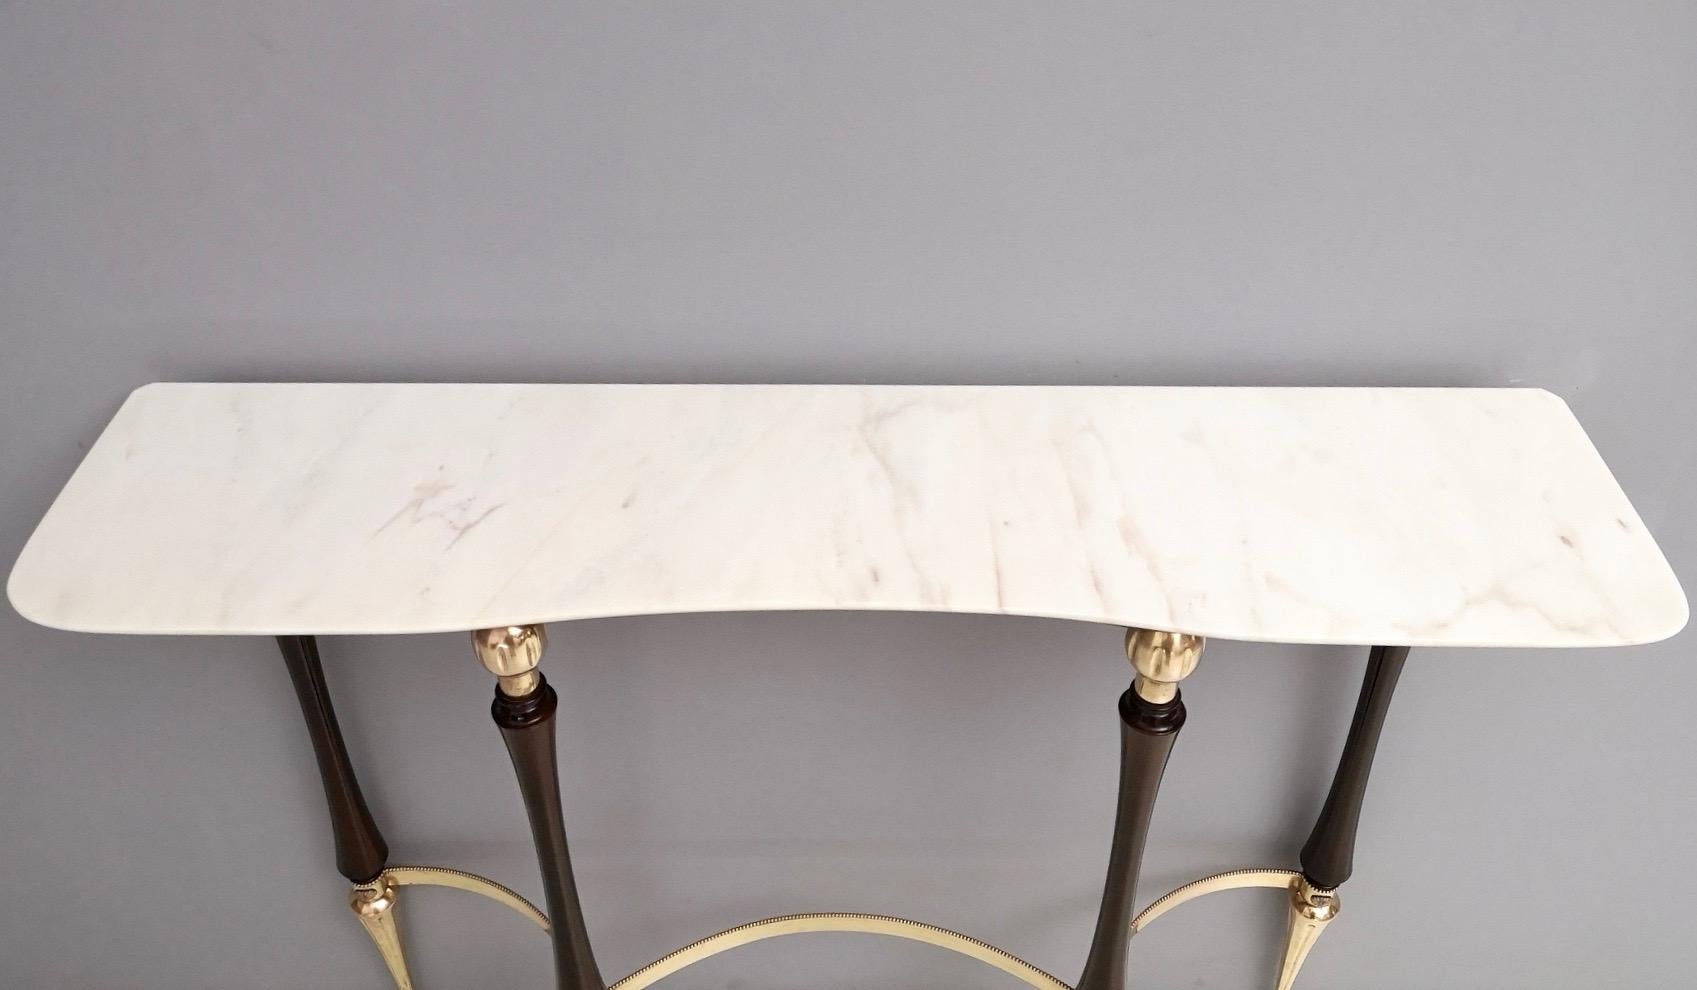 Italian Midcentury Wood and Brass Console Table with Carrara Marble Top, Italy, 1950s